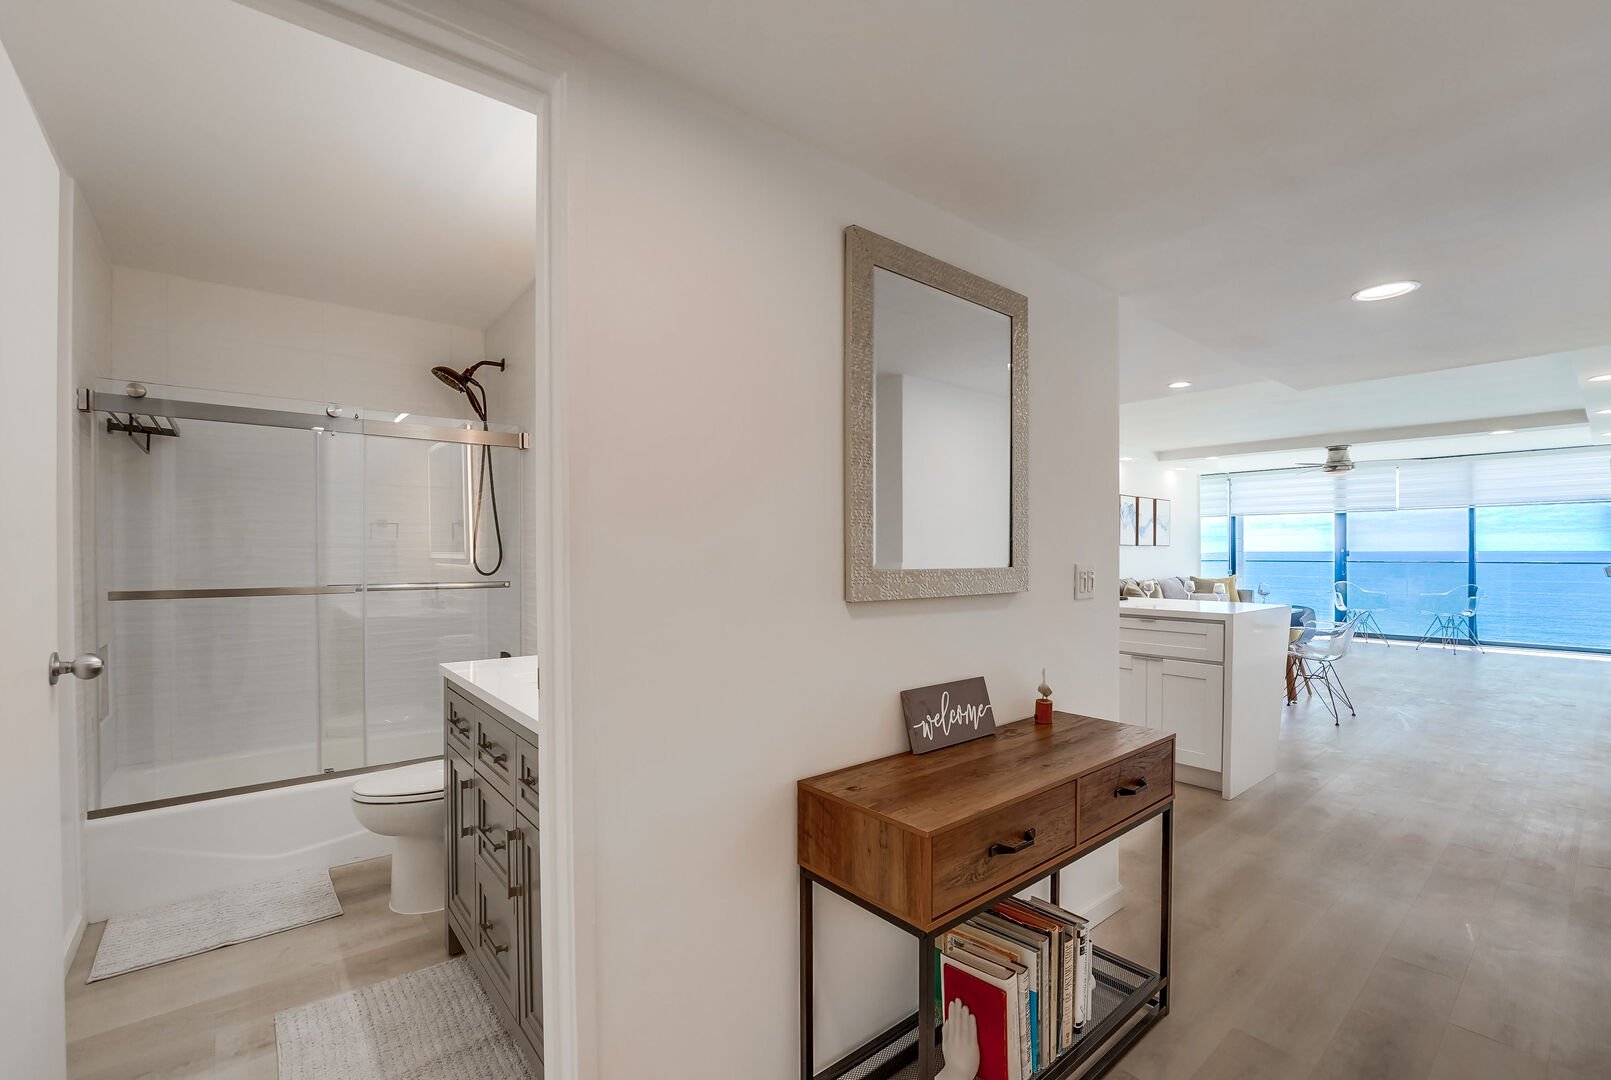 Foyer into the remodeled bathroom with shower/tub combo, spacious vanity, toilet and LED dimmable smart mirror